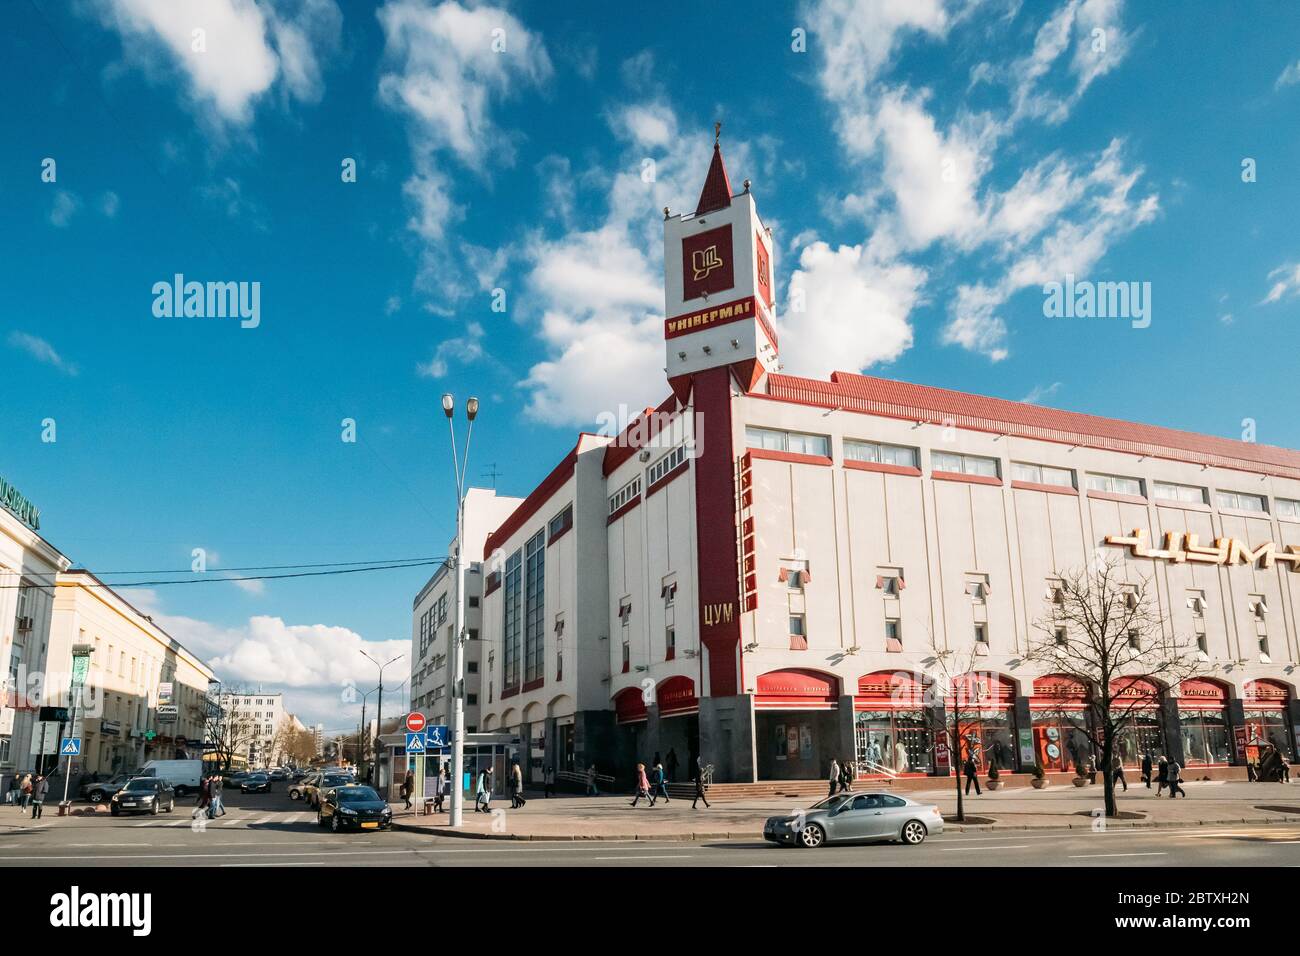 Minsk, Belarus - April 7, 2017: View Of Central Universal Department Store In Sunny Day. Stock Photo